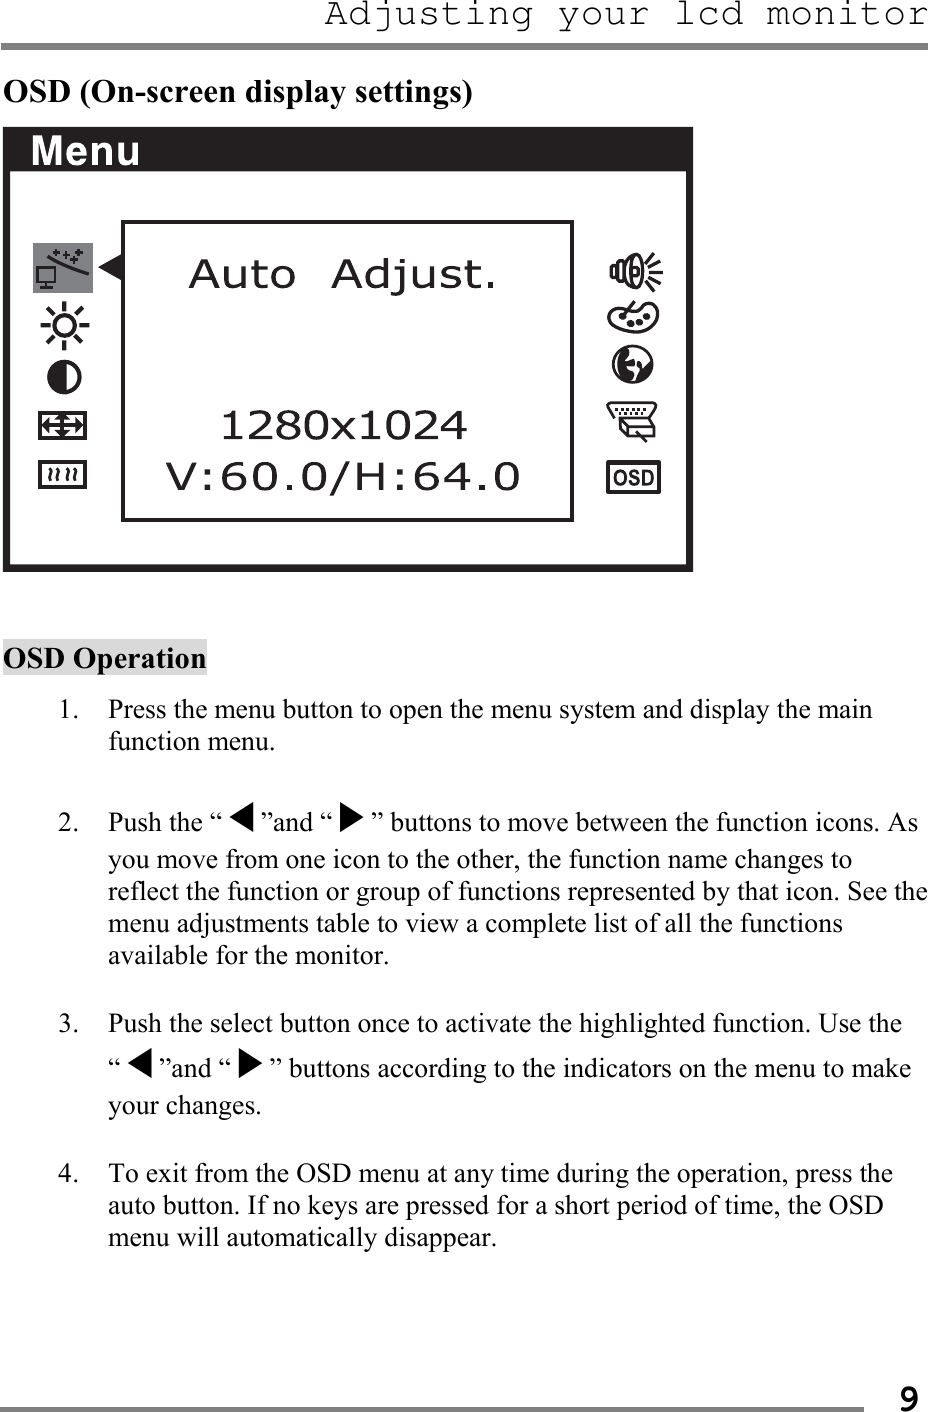 Adjusting your lcd monitor   9OSD (On-screen display settings)    OSD Operation  1. Press the menu button to open the menu system and display the main function menu.  2. Push the “◀”and “▶” buttons to move between the function icons. As you move from one icon to the other, the function name changes to reflect the function or group of functions represented by that icon. See the menu adjustments table to view a complete list of all the functions available for the monitor.  3. Push the select button once to activate the highlighted function. Use the “◀”and “▶” buttons according to the indicators on the menu to make your changes.  4. To exit from the OSD menu at any time during the operation, press the auto button. If no keys are pressed for a short period of time, the OSD menu will automatically disappear.    